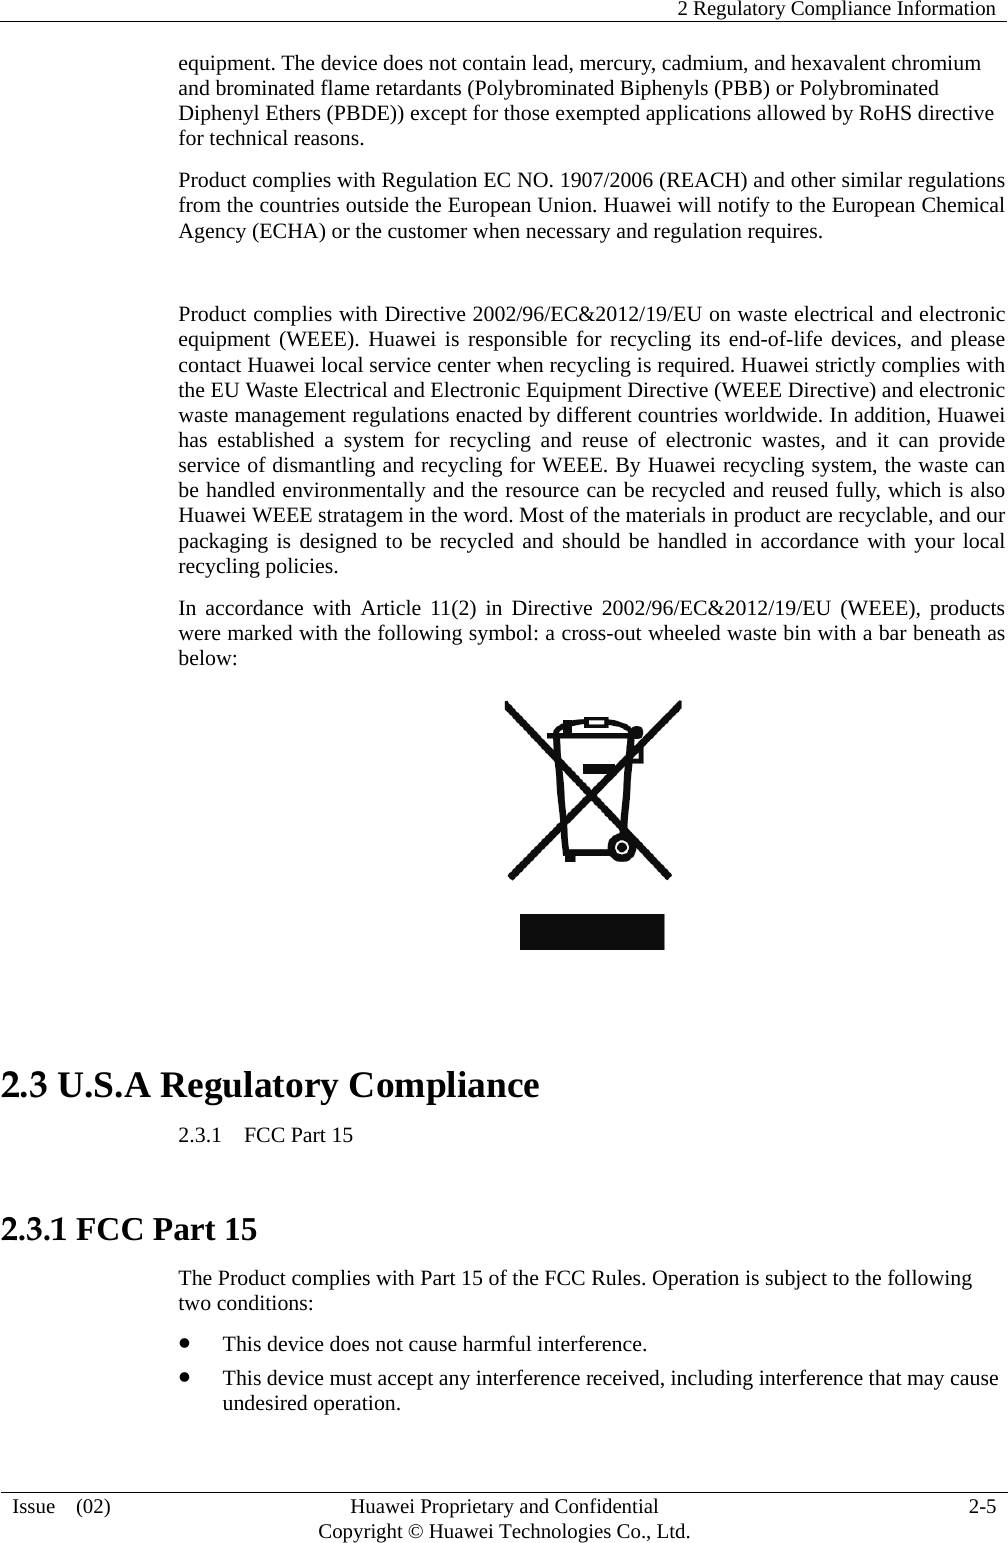    2 Regulatory Compliance Information   Issue  (02)  Huawei Proprietary and Confidential     Copyright © Huawei Technologies Co., Ltd.  2-5  equipment. The device does not contain lead, mercury, cadmium, and hexavalent chromium and brominated flame retardants (Polybrominated Biphenyls (PBB) or Polybrominated Diphenyl Ethers (PBDE)) except for those exempted applications allowed by RoHS directive for technical reasons.   Product complies with Regulation EC NO. 1907/2006 (REACH) and other similar regulations from the countries outside the European Union. Huawei will notify to the European Chemical Agency (ECHA) or the customer when necessary and regulation requires.  Product complies with Directive 2002/96/EC&amp;2012/19/EU on waste electrical and electronic equipment (WEEE). Huawei is responsible for recycling its end-of-life devices, and please contact Huawei local service center when recycling is required. Huawei strictly complies with the EU Waste Electrical and Electronic Equipment Directive (WEEE Directive) and electronic waste management regulations enacted by different countries worldwide. In addition, Huawei has established a system for recycling and reuse of electronic wastes, and it can provide service of dismantling and recycling for WEEE. By Huawei recycling system, the waste can be handled environmentally and the resource can be recycled and reused fully, which is also Huawei WEEE stratagem in the word. Most of the materials in product are recyclable, and our packaging is designed to be recycled and should be handled in accordance with your local recycling policies.   In accordance with Article 11(2) in Directive 2002/96/EC&amp;2012/19/EU (WEEE), products were marked with the following symbol: a cross-out wheeled waste bin with a bar beneath as below:   2.3 U.S.A Regulatory Compliance 2.3.1  FCC Part 15  2.3.1 FCC Part 15 The Product complies with Part 15 of the FCC Rules. Operation is subject to the following two conditions:  This device does not cause harmful interference.  This device must accept any interference received, including interference that may cause undesired operation. 